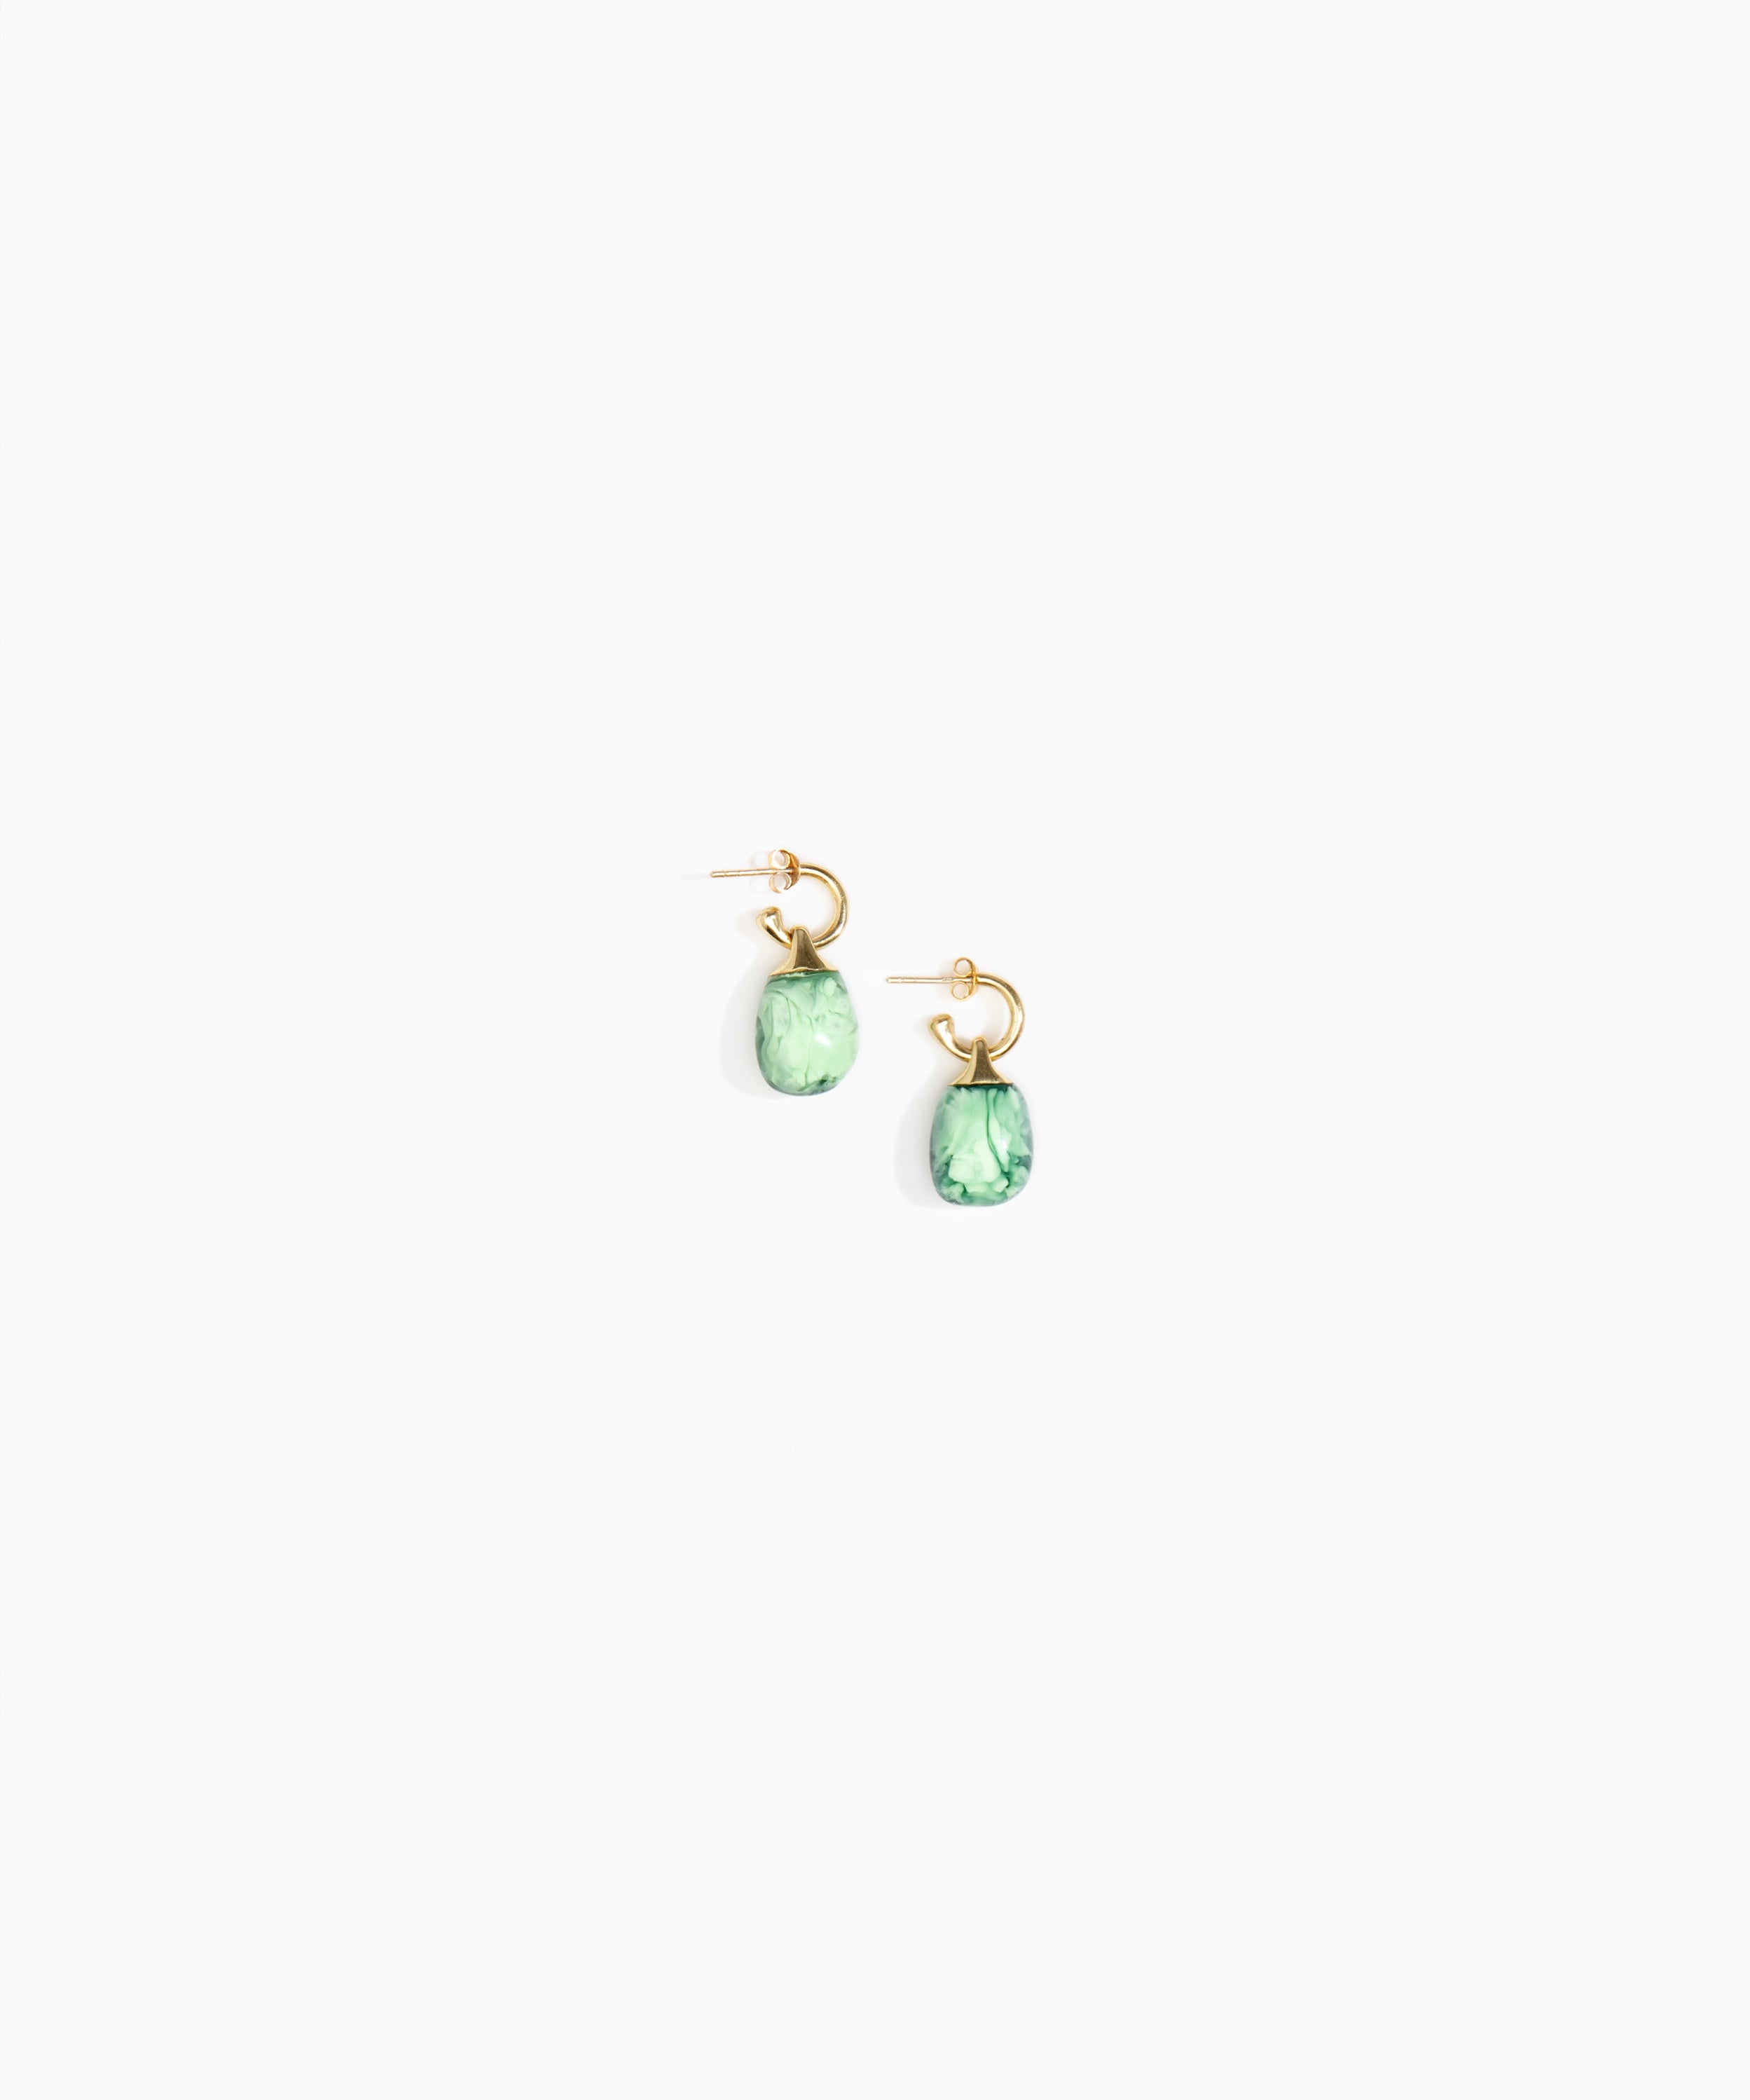 Dinosaur Designs Small River Rock Hoops Earrings in Moss color resin with Brass Hoop Material